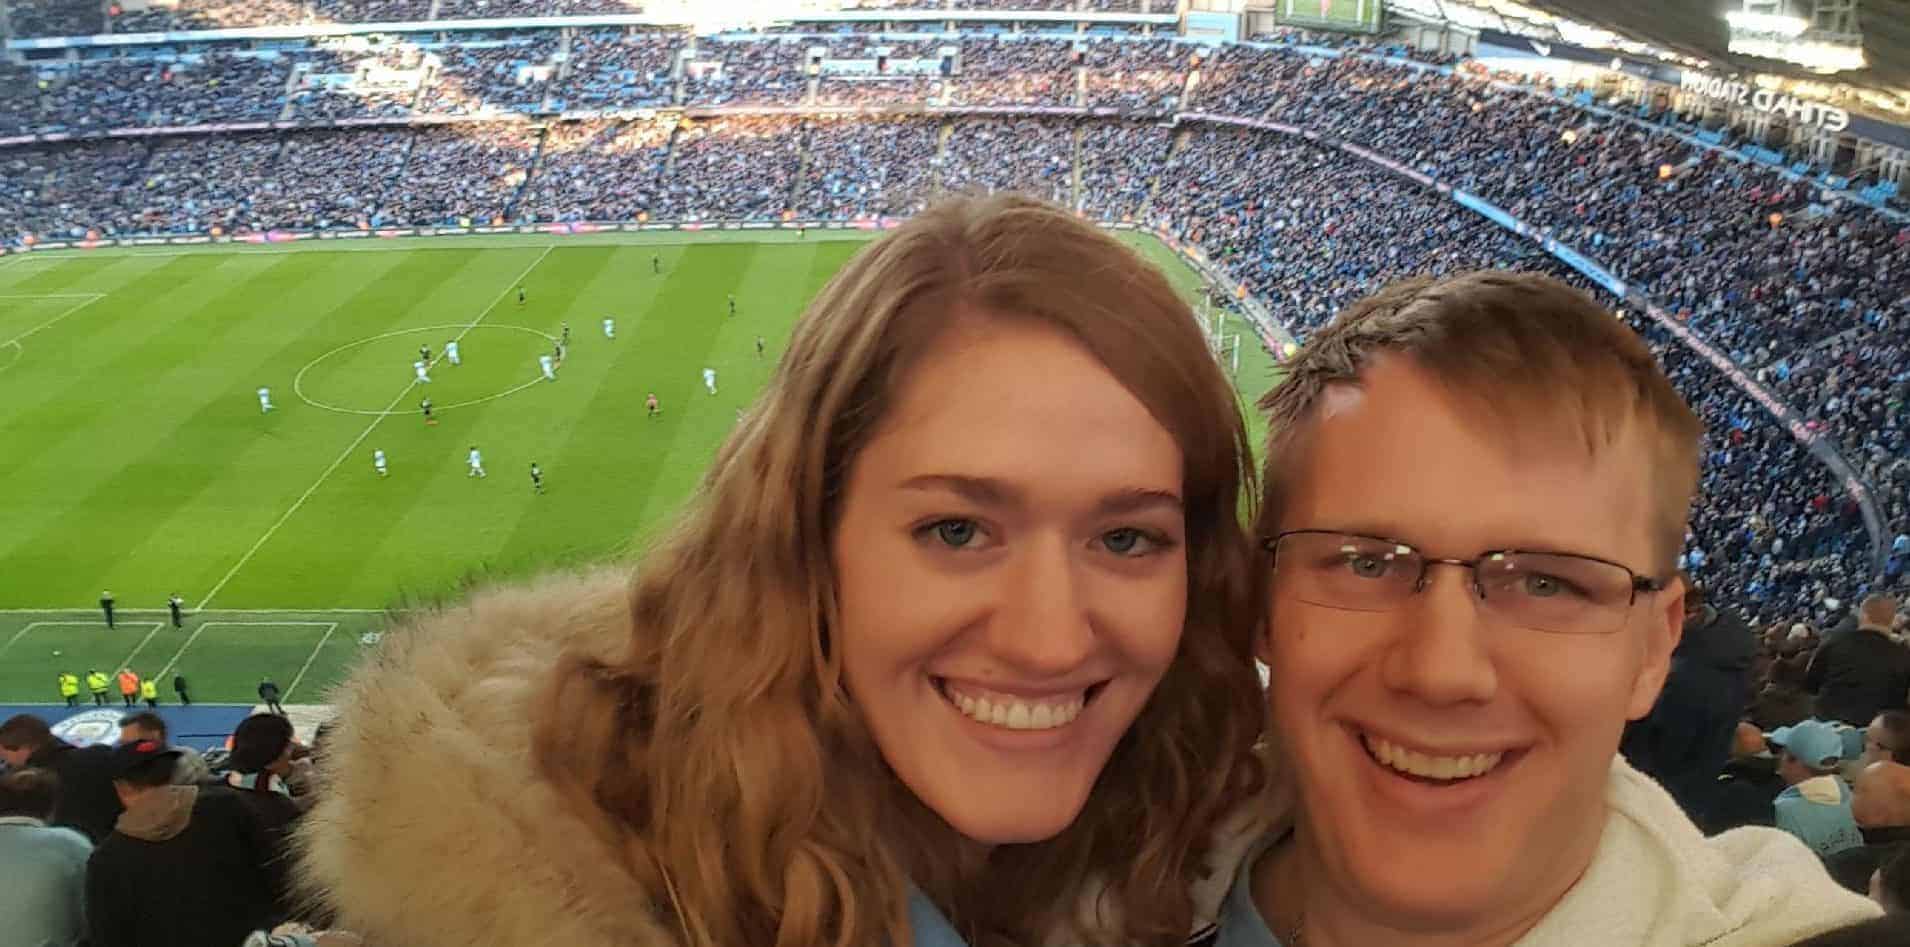 Reader Report: April and Garrett See a Game at Manchester City